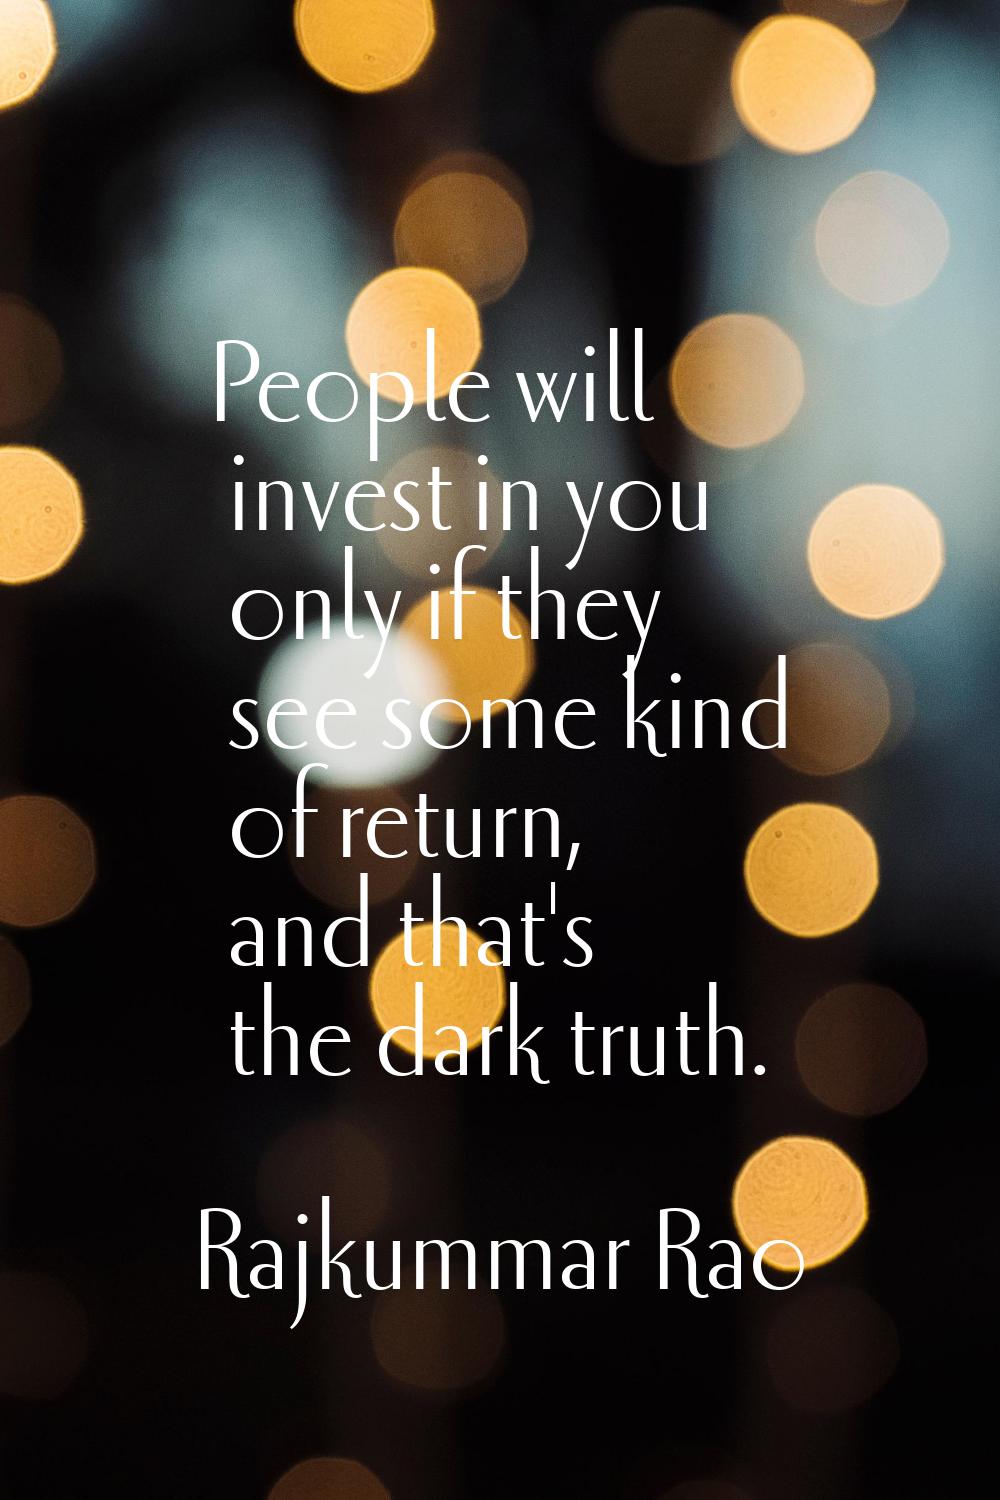 People will invest in you only if they see some kind of return, and that's the dark truth.